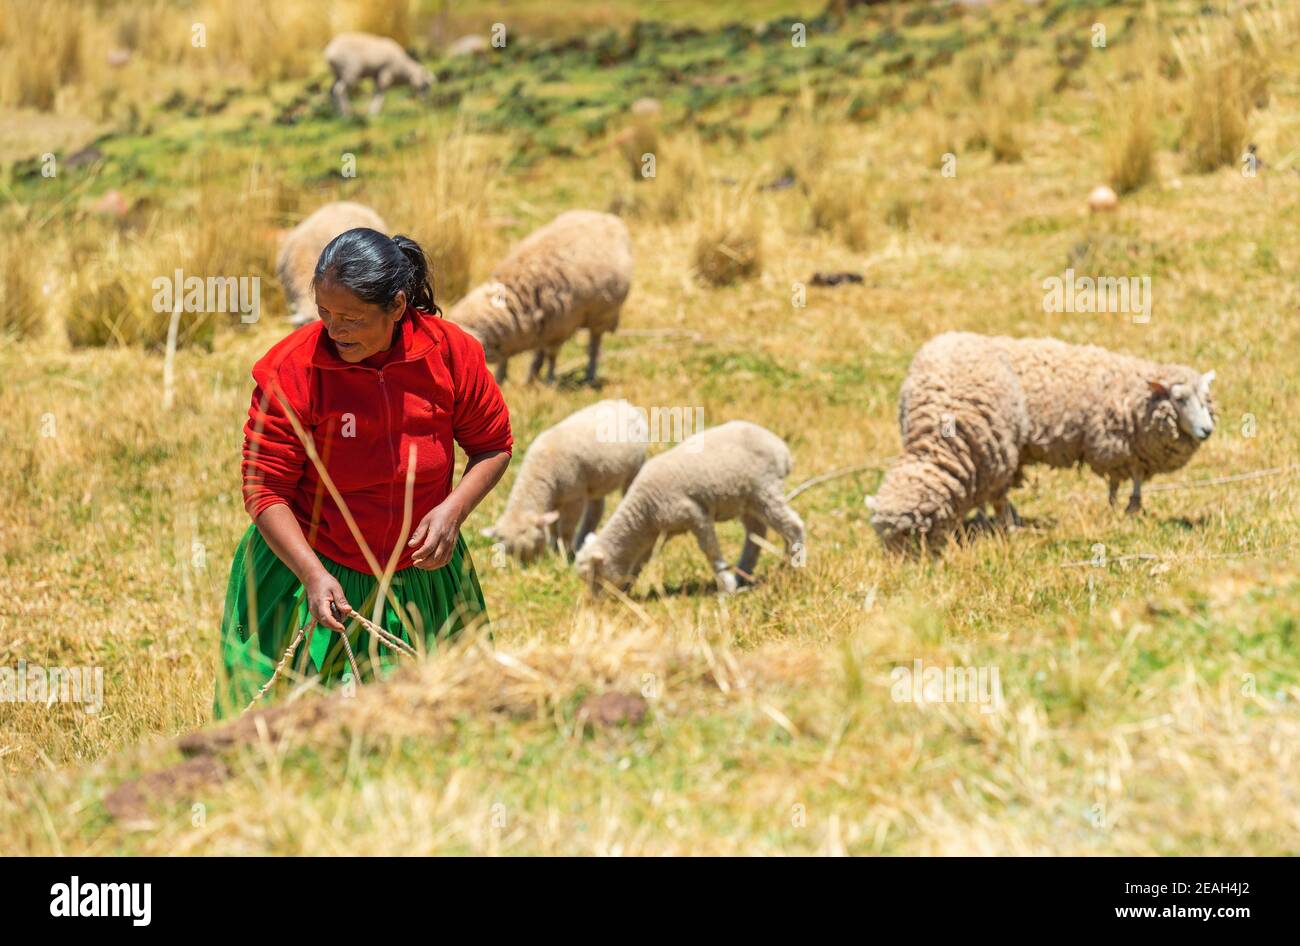 Indigenous Peruvian Quechua woman with a herd of sheep on her agriculture field in the Sacred Valley of the Inca, Cusco, Peru. Stock Photo